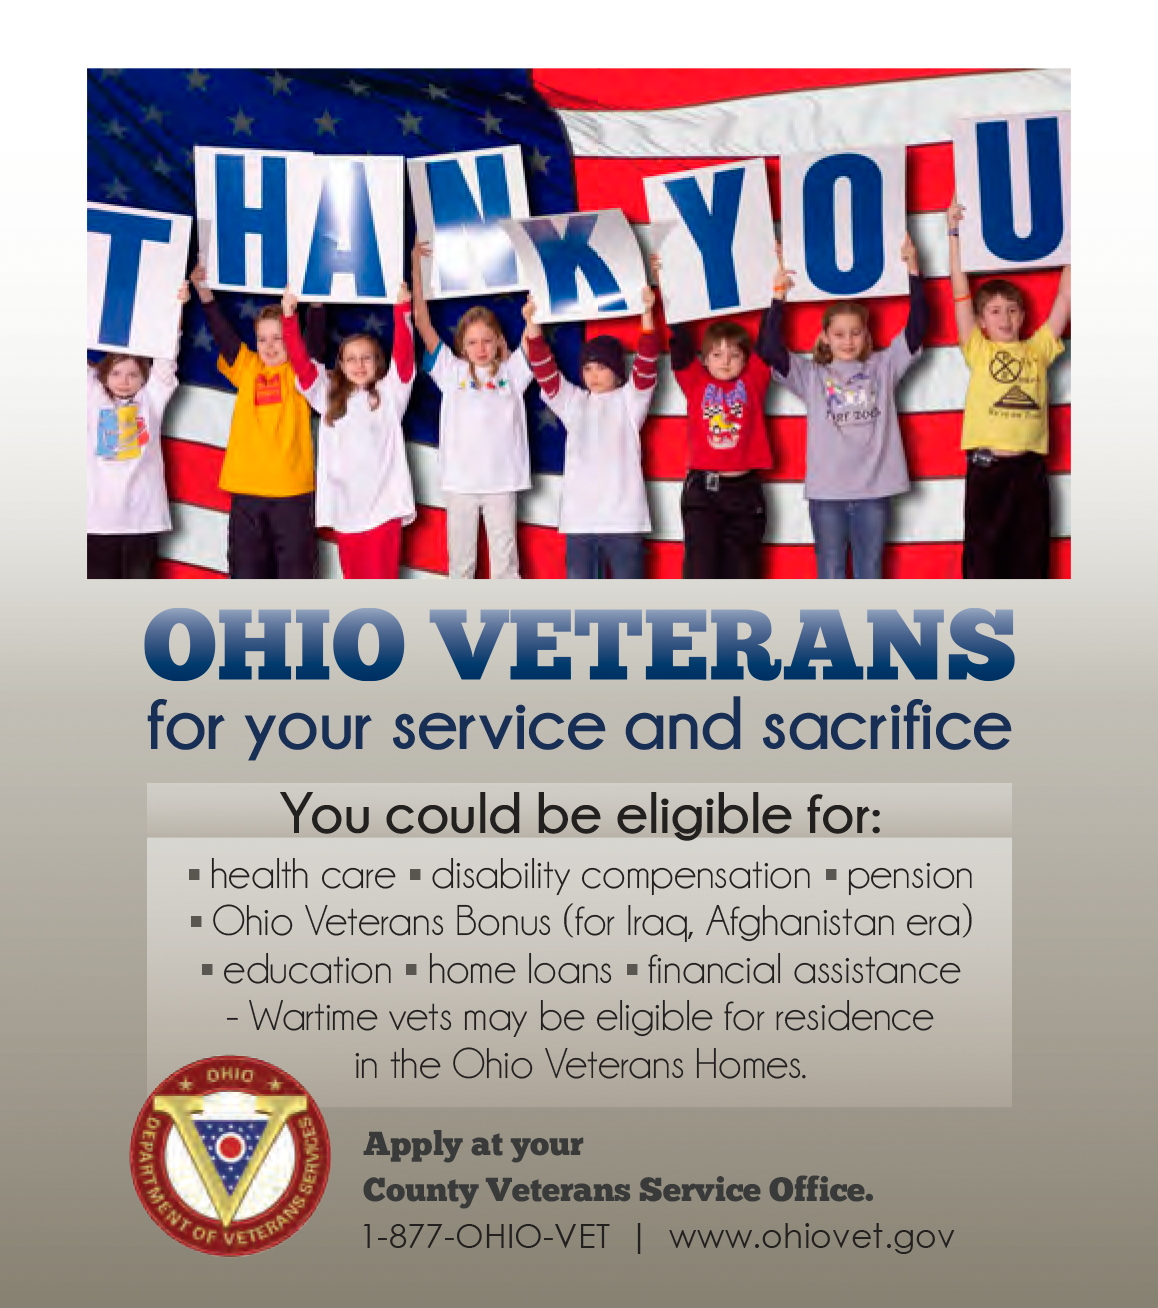 Thank You Ohio Vets newspaper ad